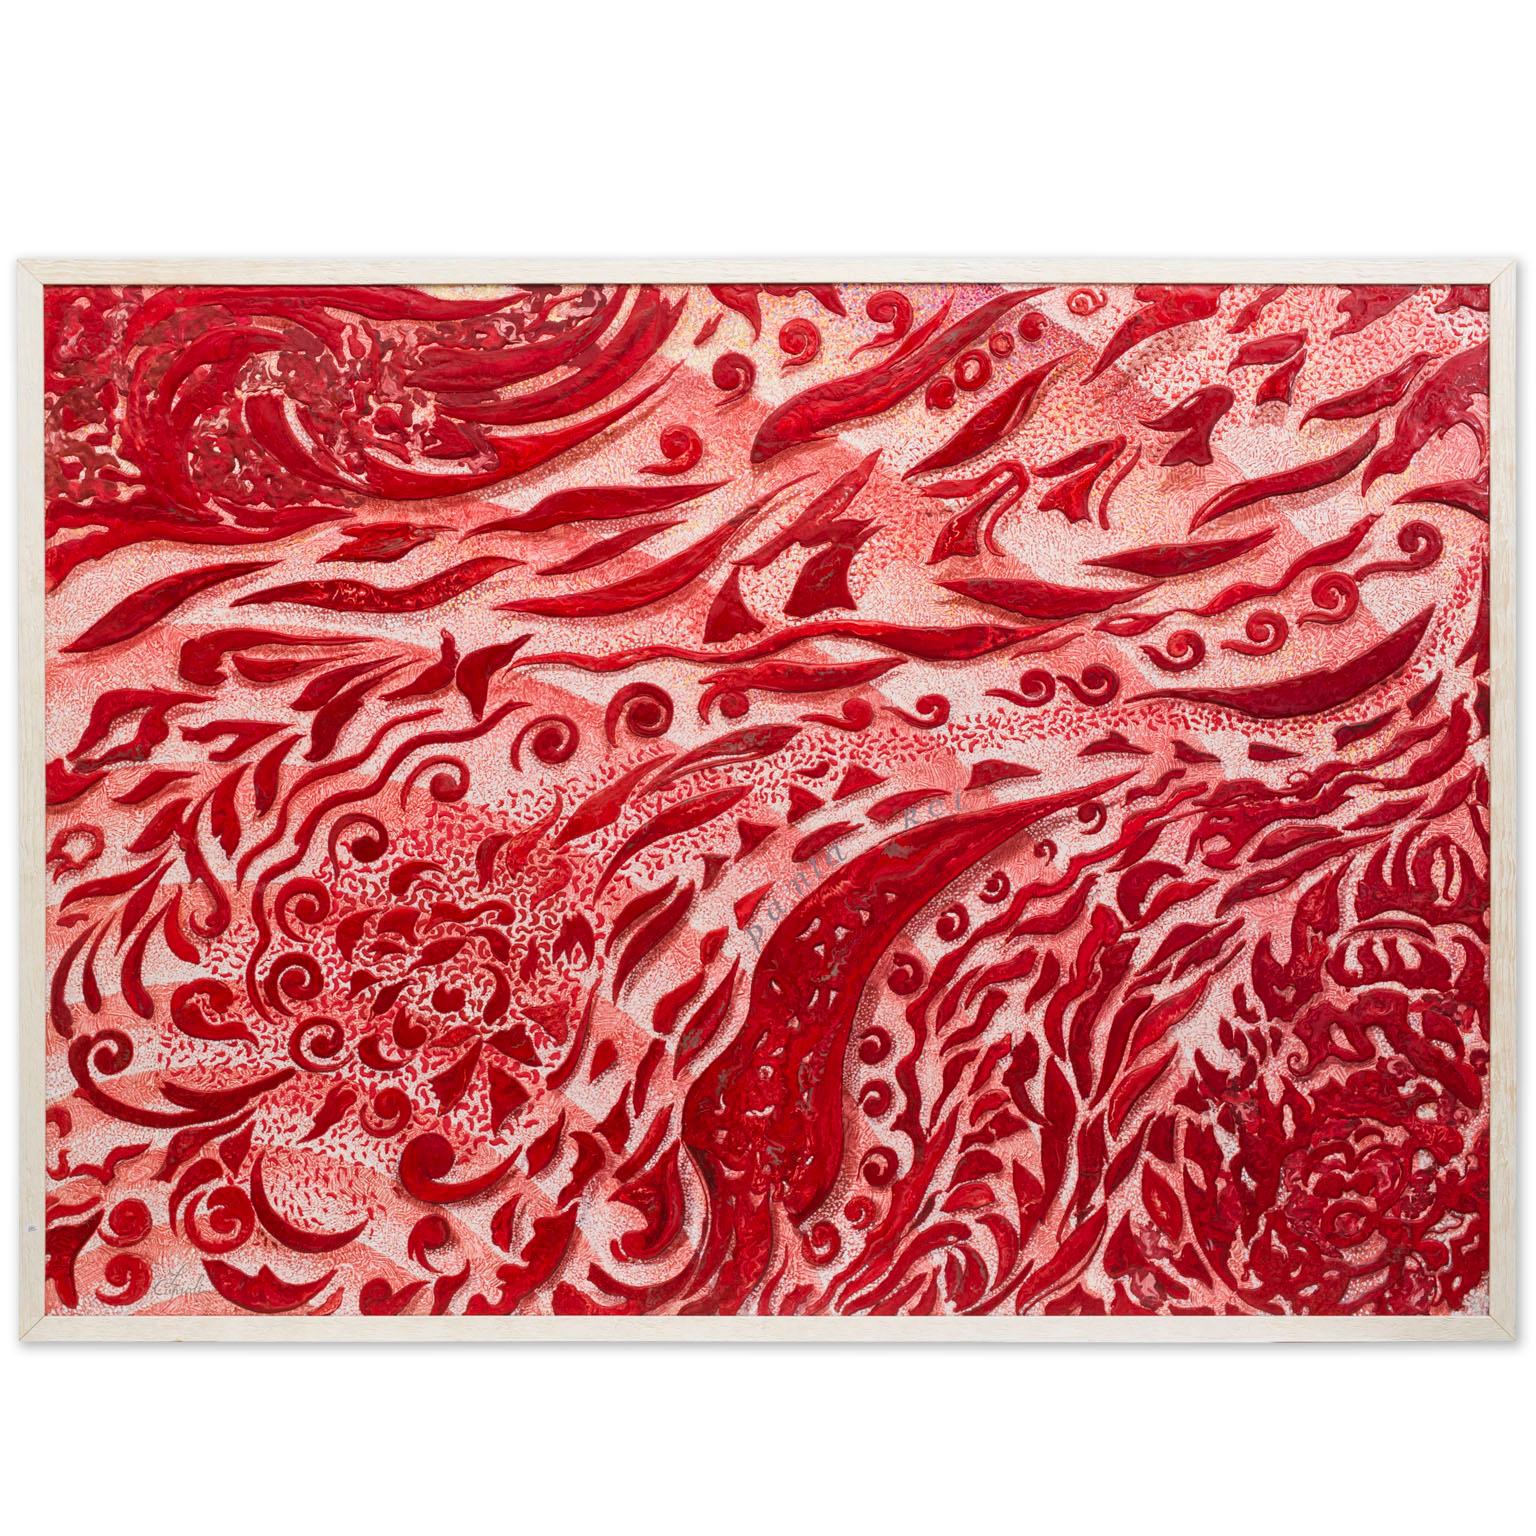  Wall panel modern red art decoration handmade in Italy by Cupioli available For Sale